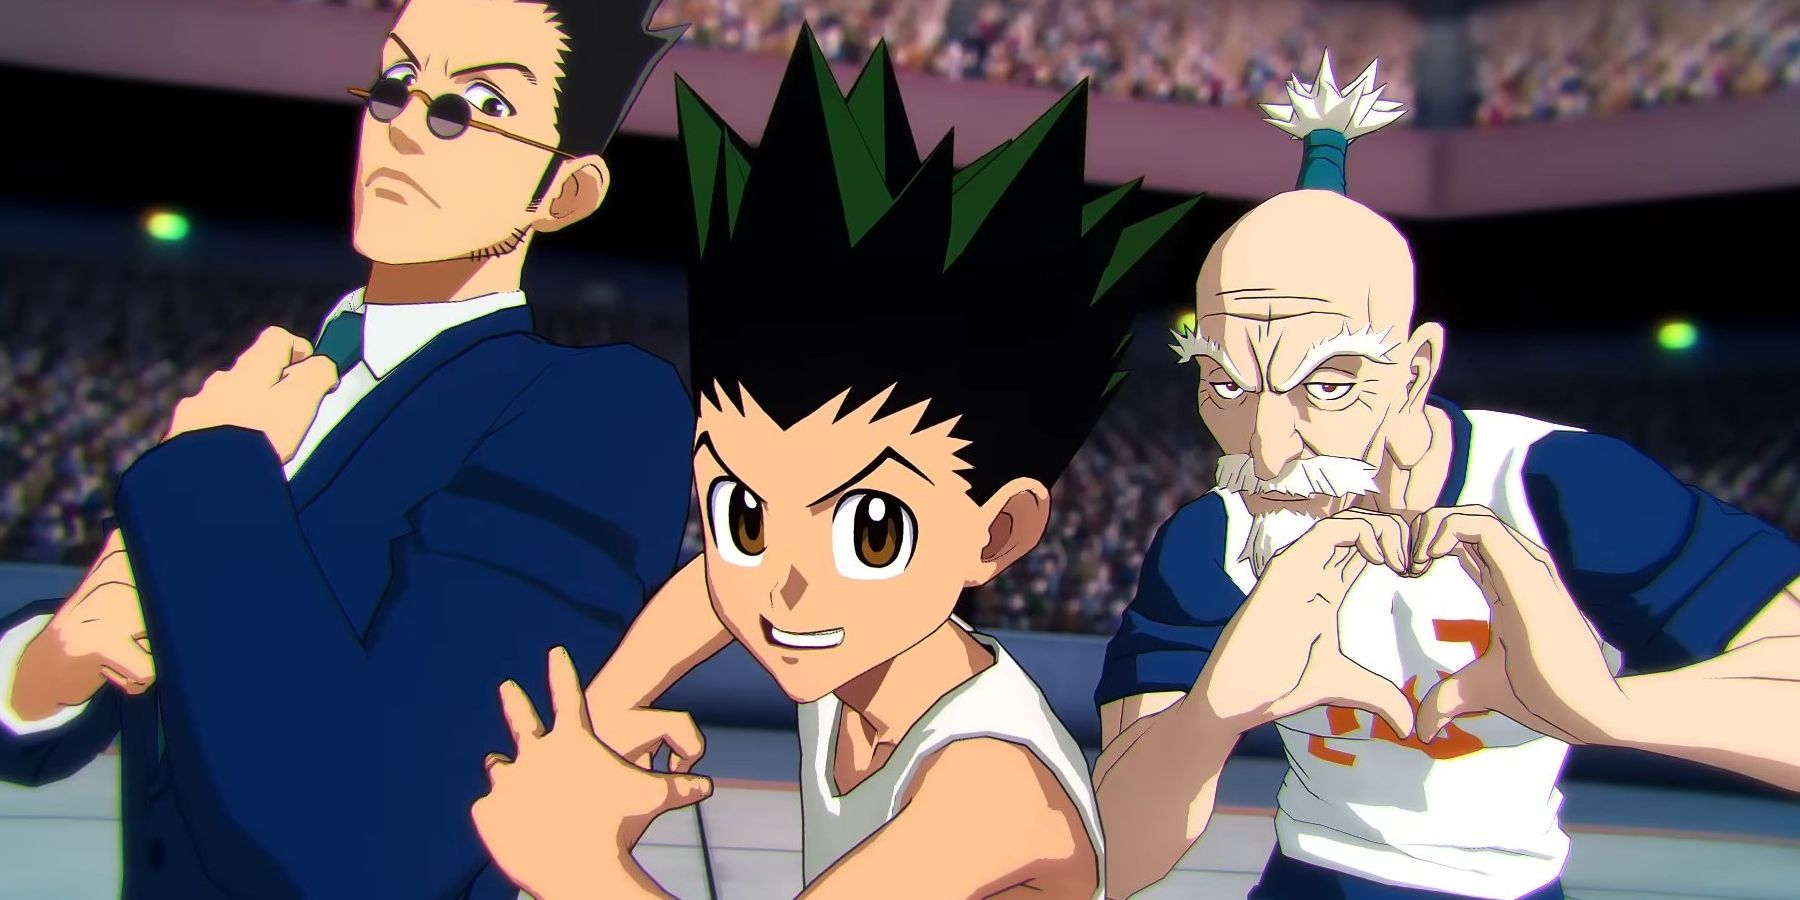 Gon Freecss and his teammates in the upcoming Hunter x Hunter fighting video game.